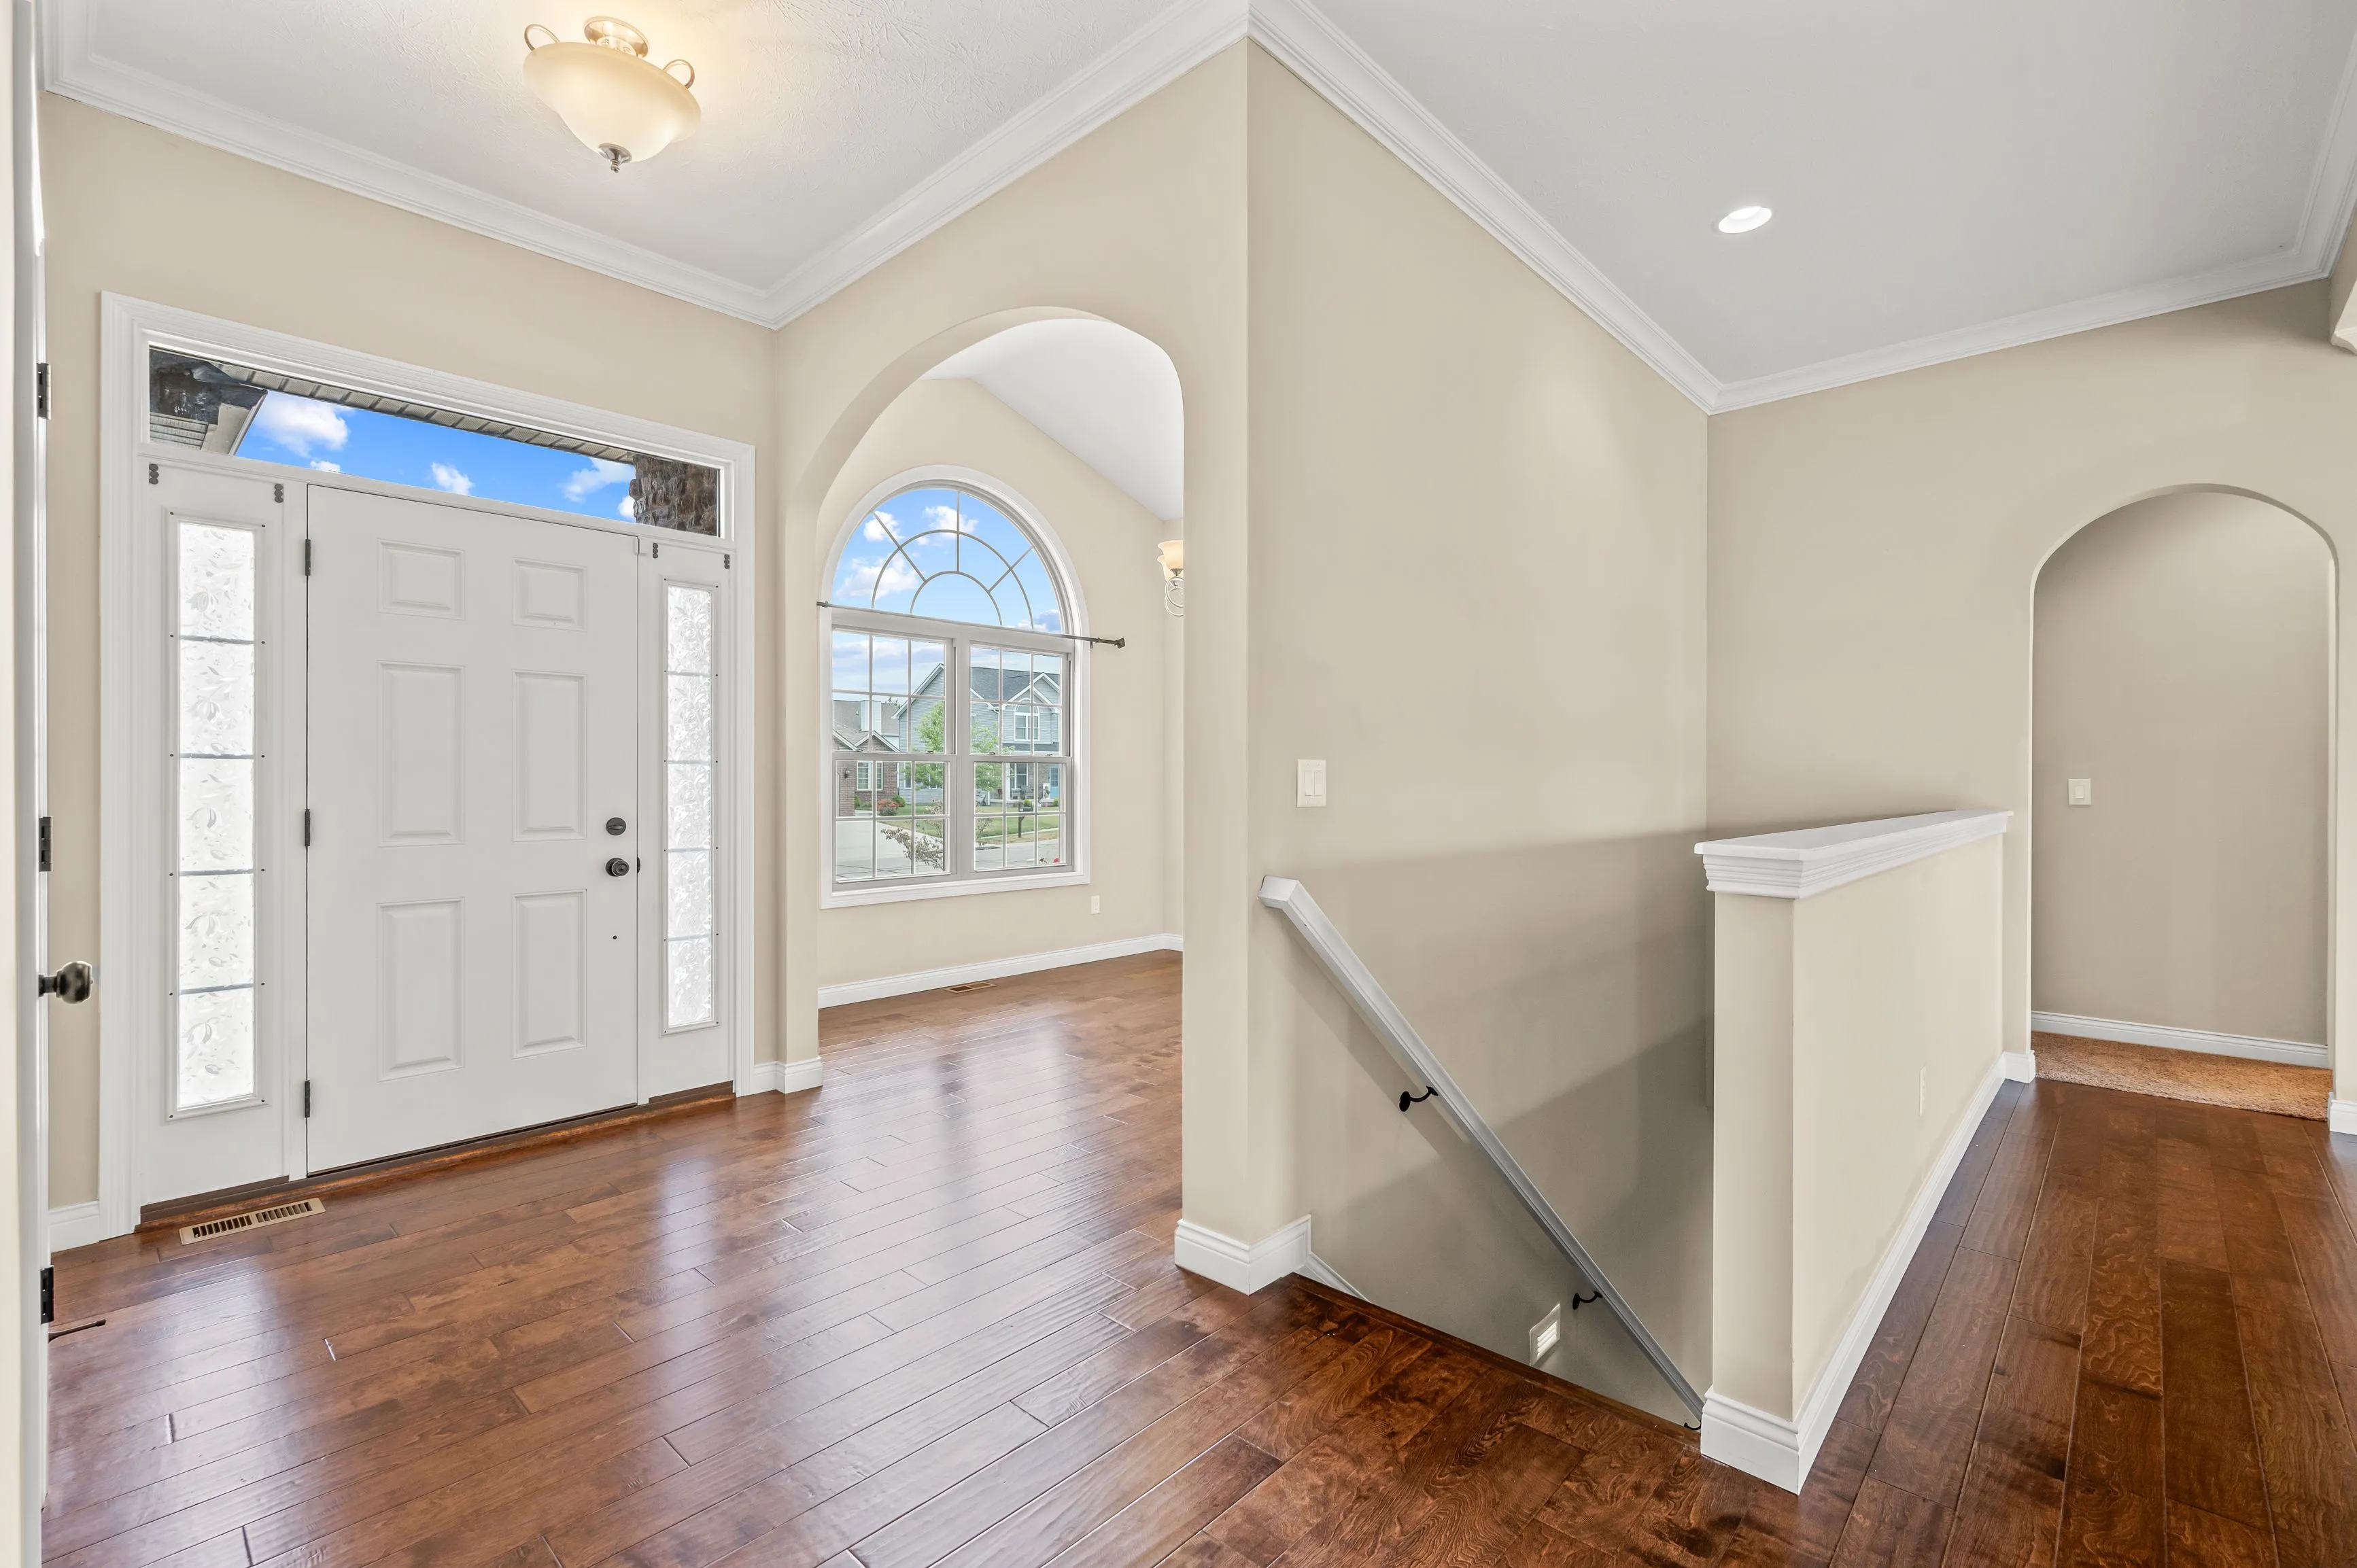 Empty living room with hardwood floors, white walls, a large arched window, and a front door with sidelights.